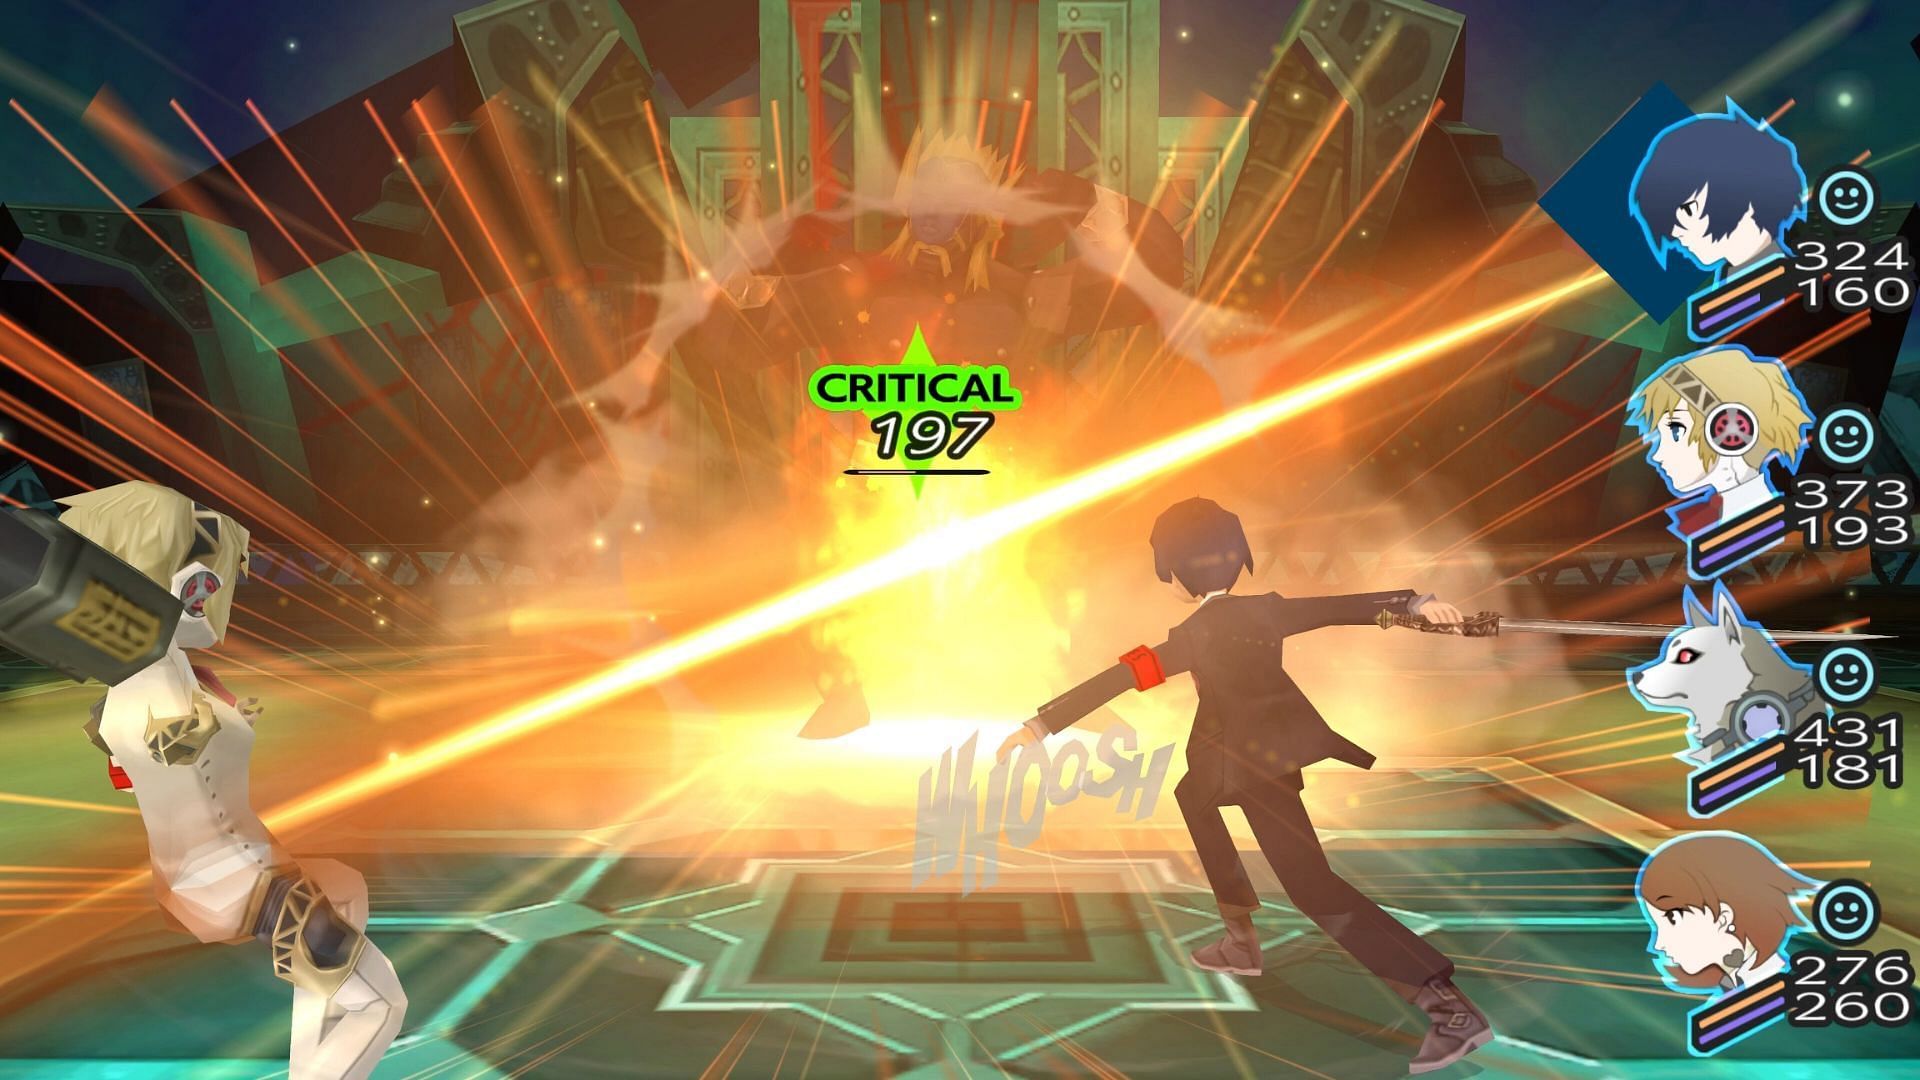 Persona 3 Portable has engaging gameplay and characters that will keep you hooked (Image via SEGA)